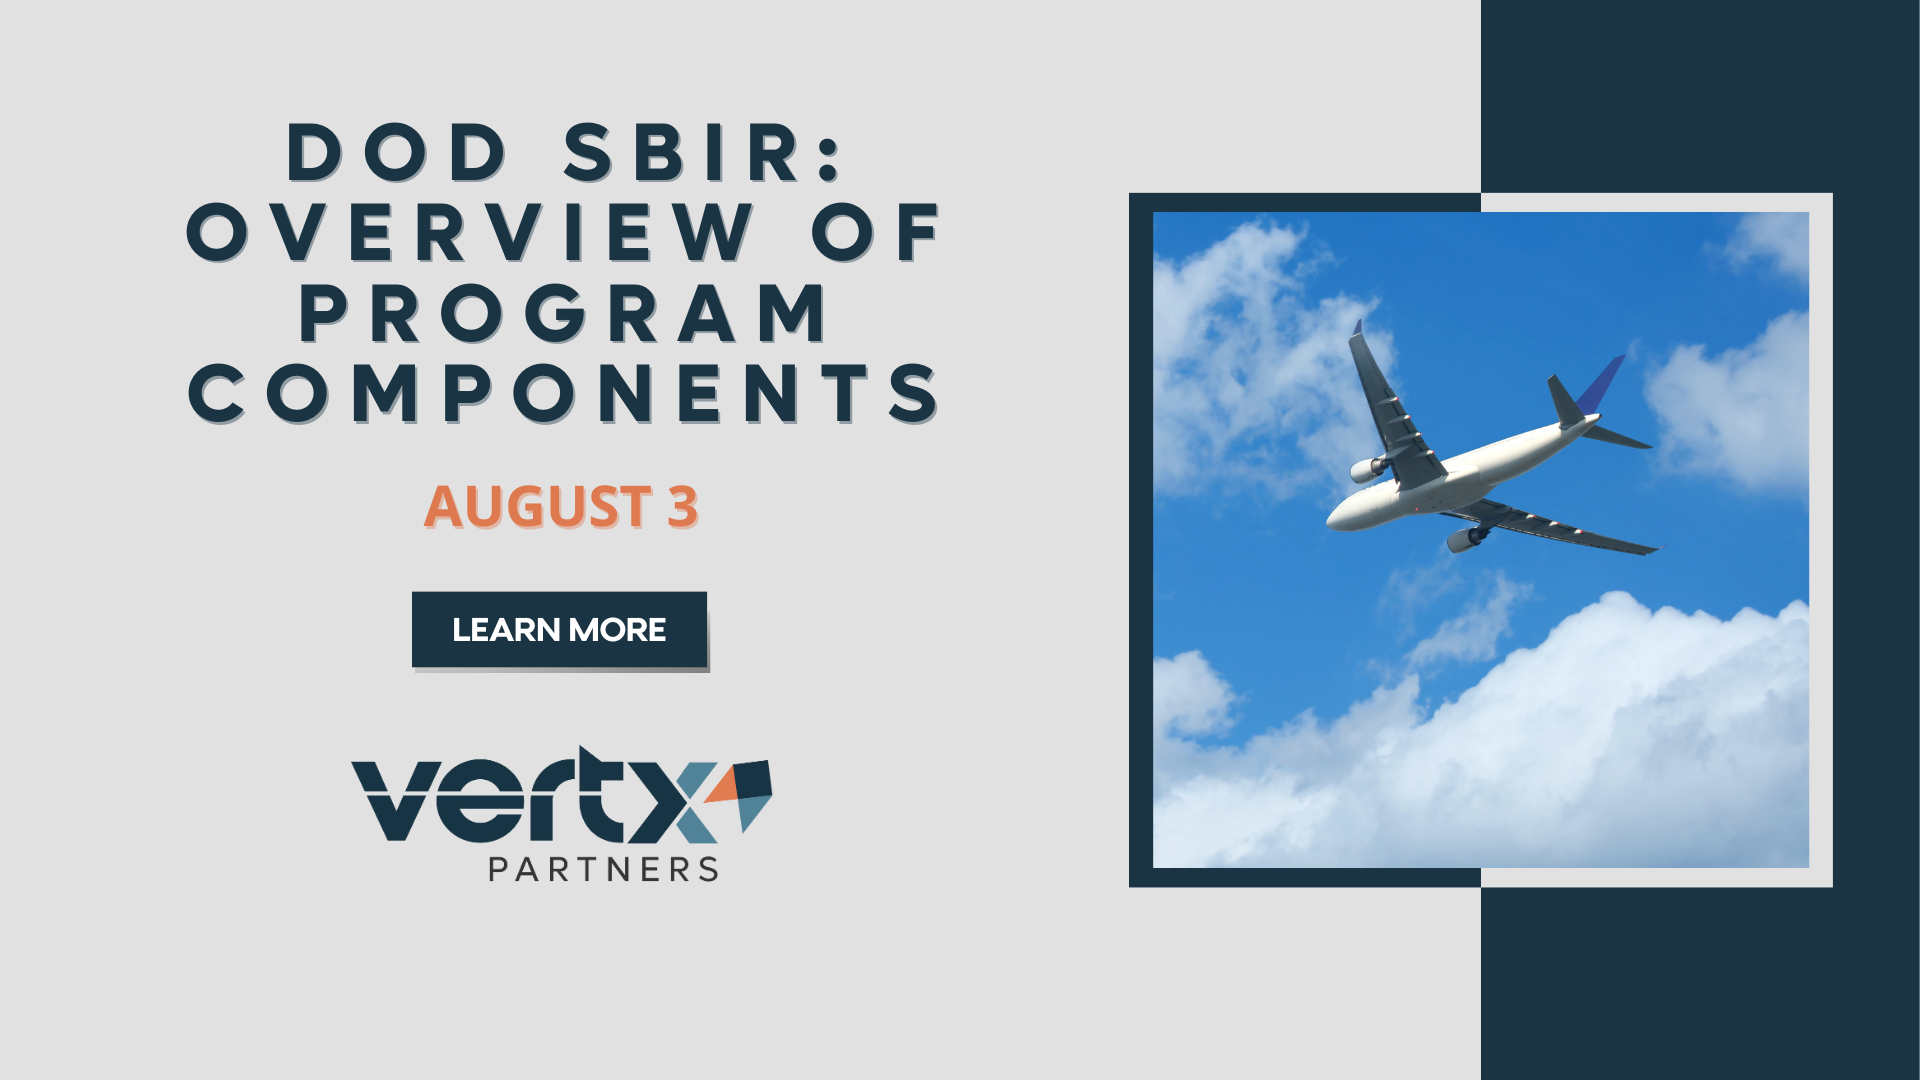 This Graphic has the title "DoD SBIR: Overview of Program Components" with the date August 3rd underneath and a photo to the right of it of a plane flying in a blue sky with white clouds.